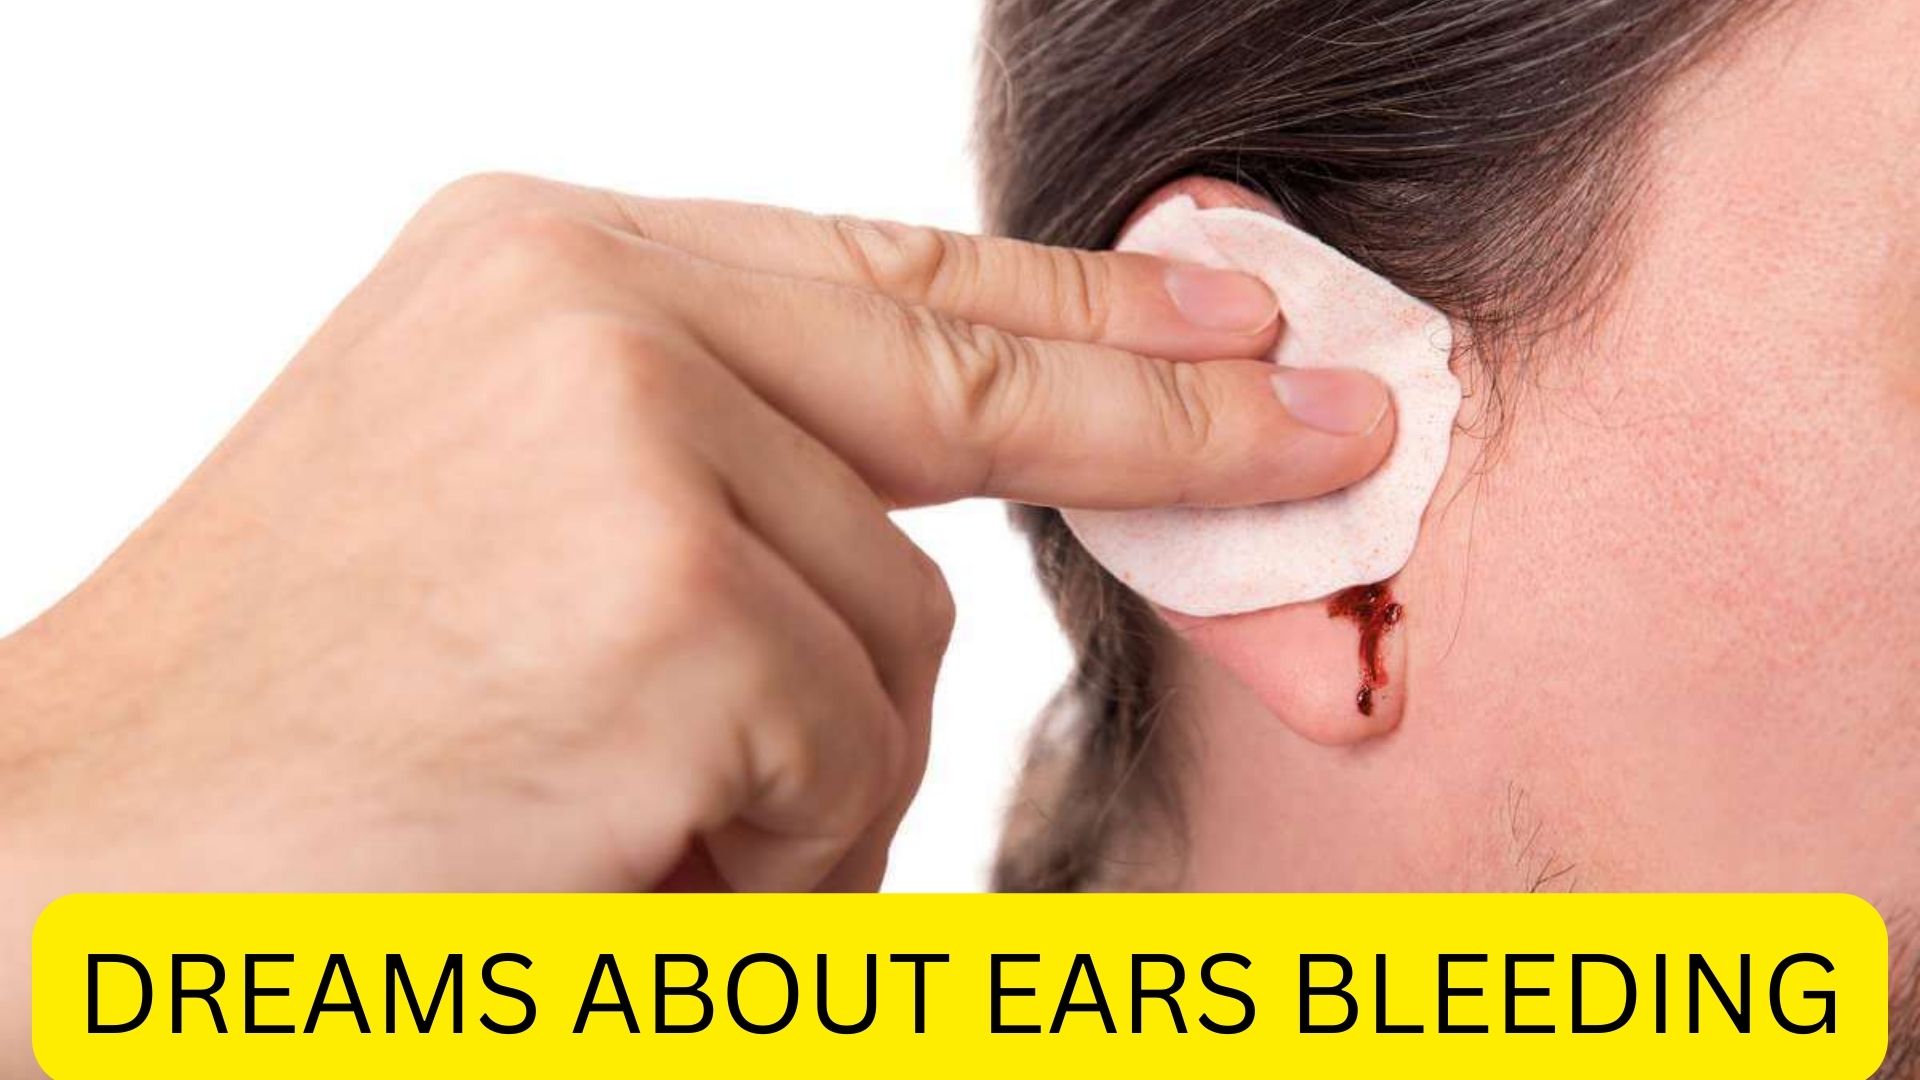 Dreams About Ears Bleeding - Indicates Confidence, Protection And Courage